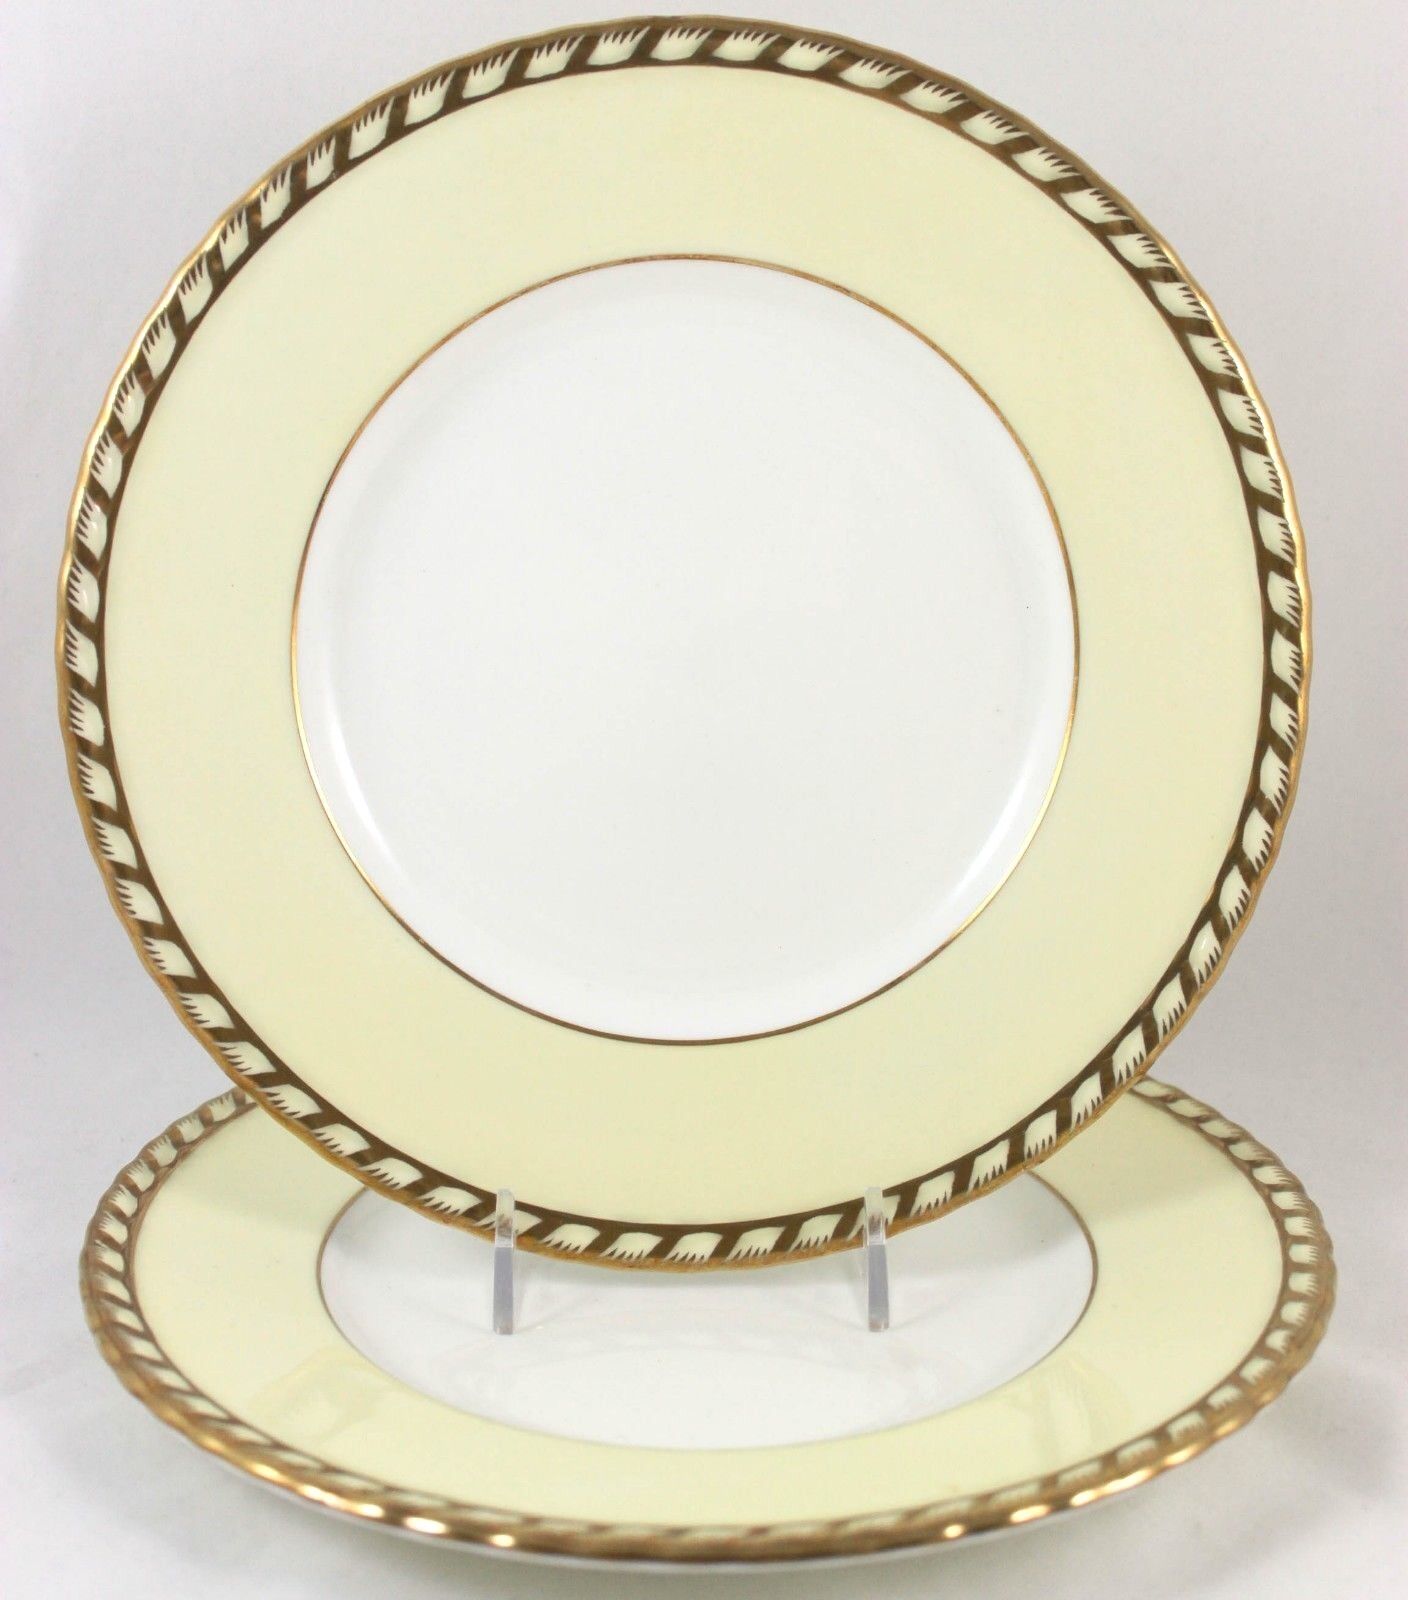 2 LUNCHEON PLATES VINTAGE MINTON CHINA COMMODORE S112 EMBOSSED GOLD ROPE CREAM